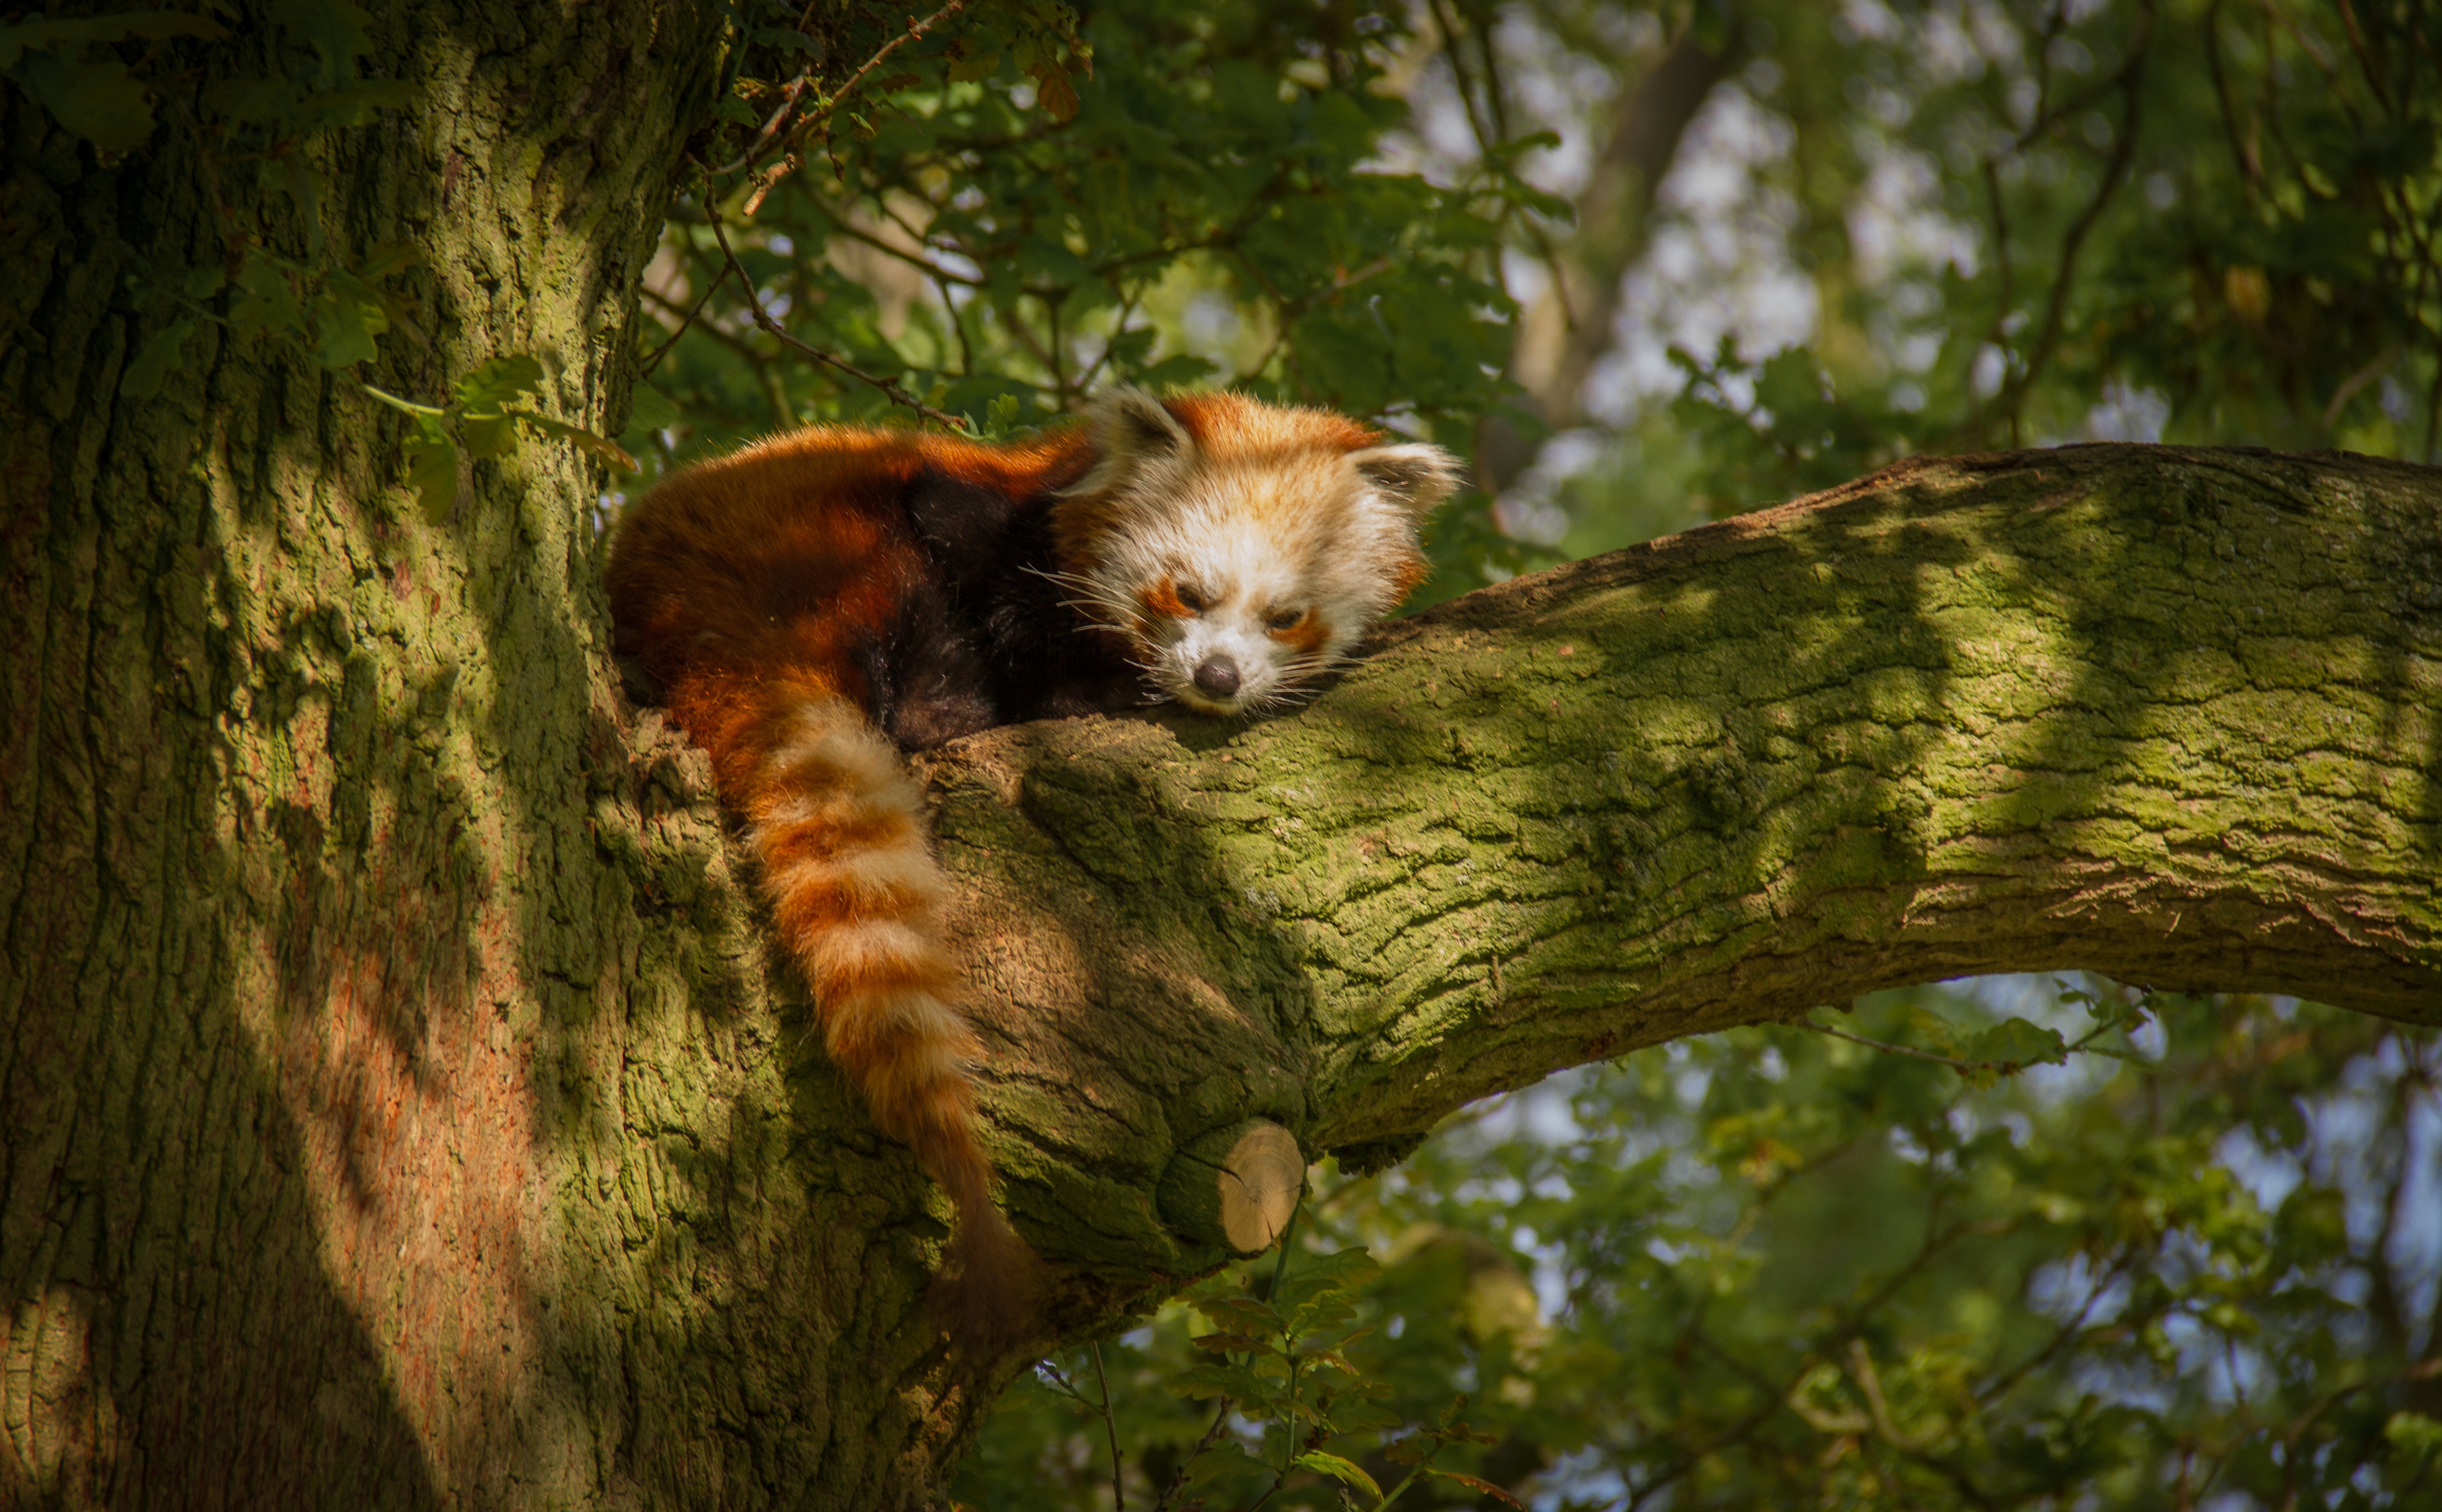 Free photo A red panda rests on the branch of an old tree in the jungle